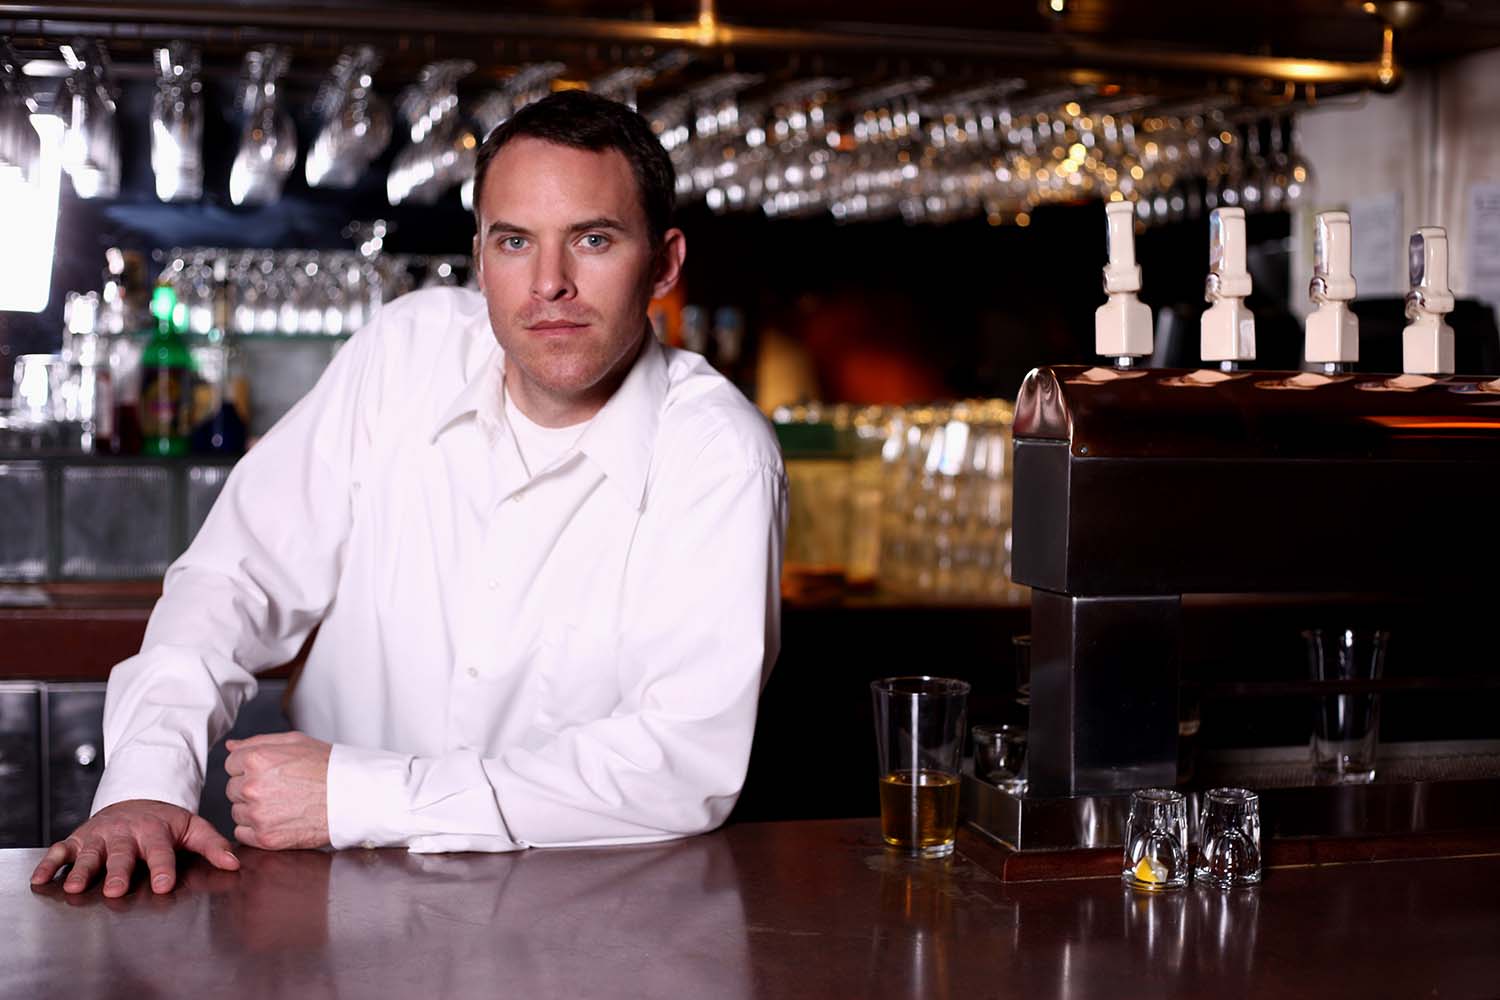 You have to work hard to learn how to be a good bartender.